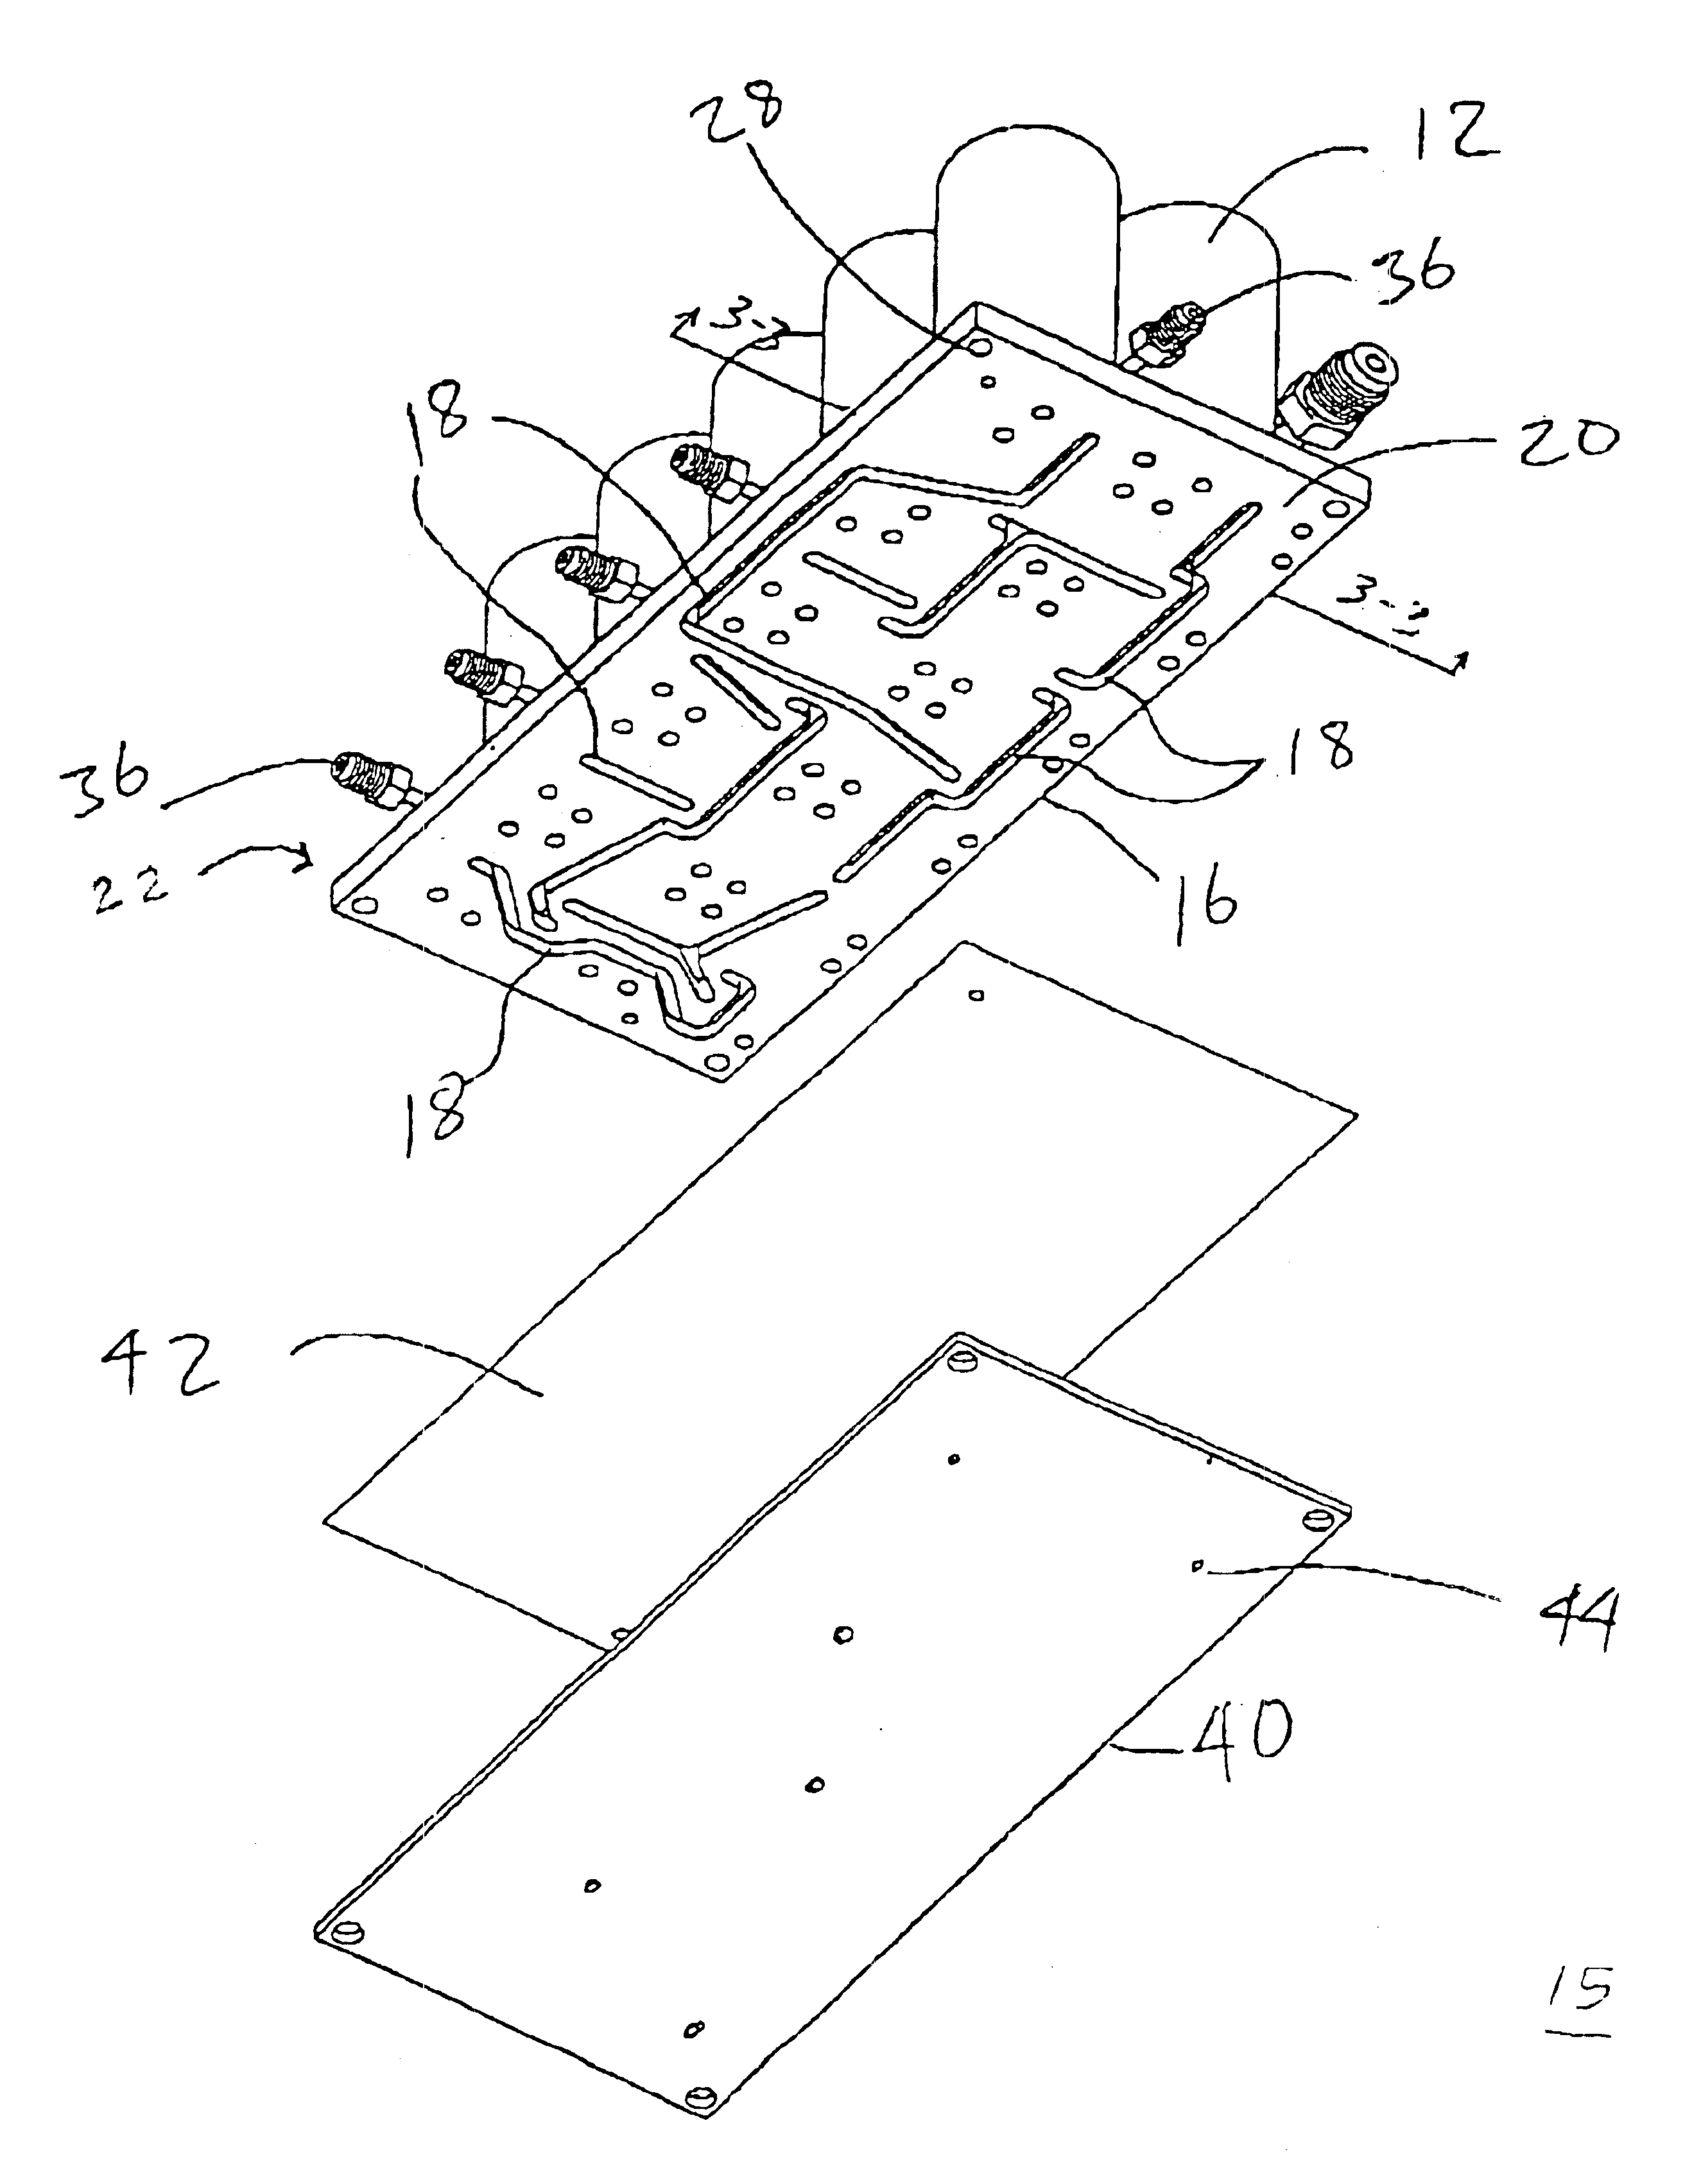 Manifolded fluid delivery system